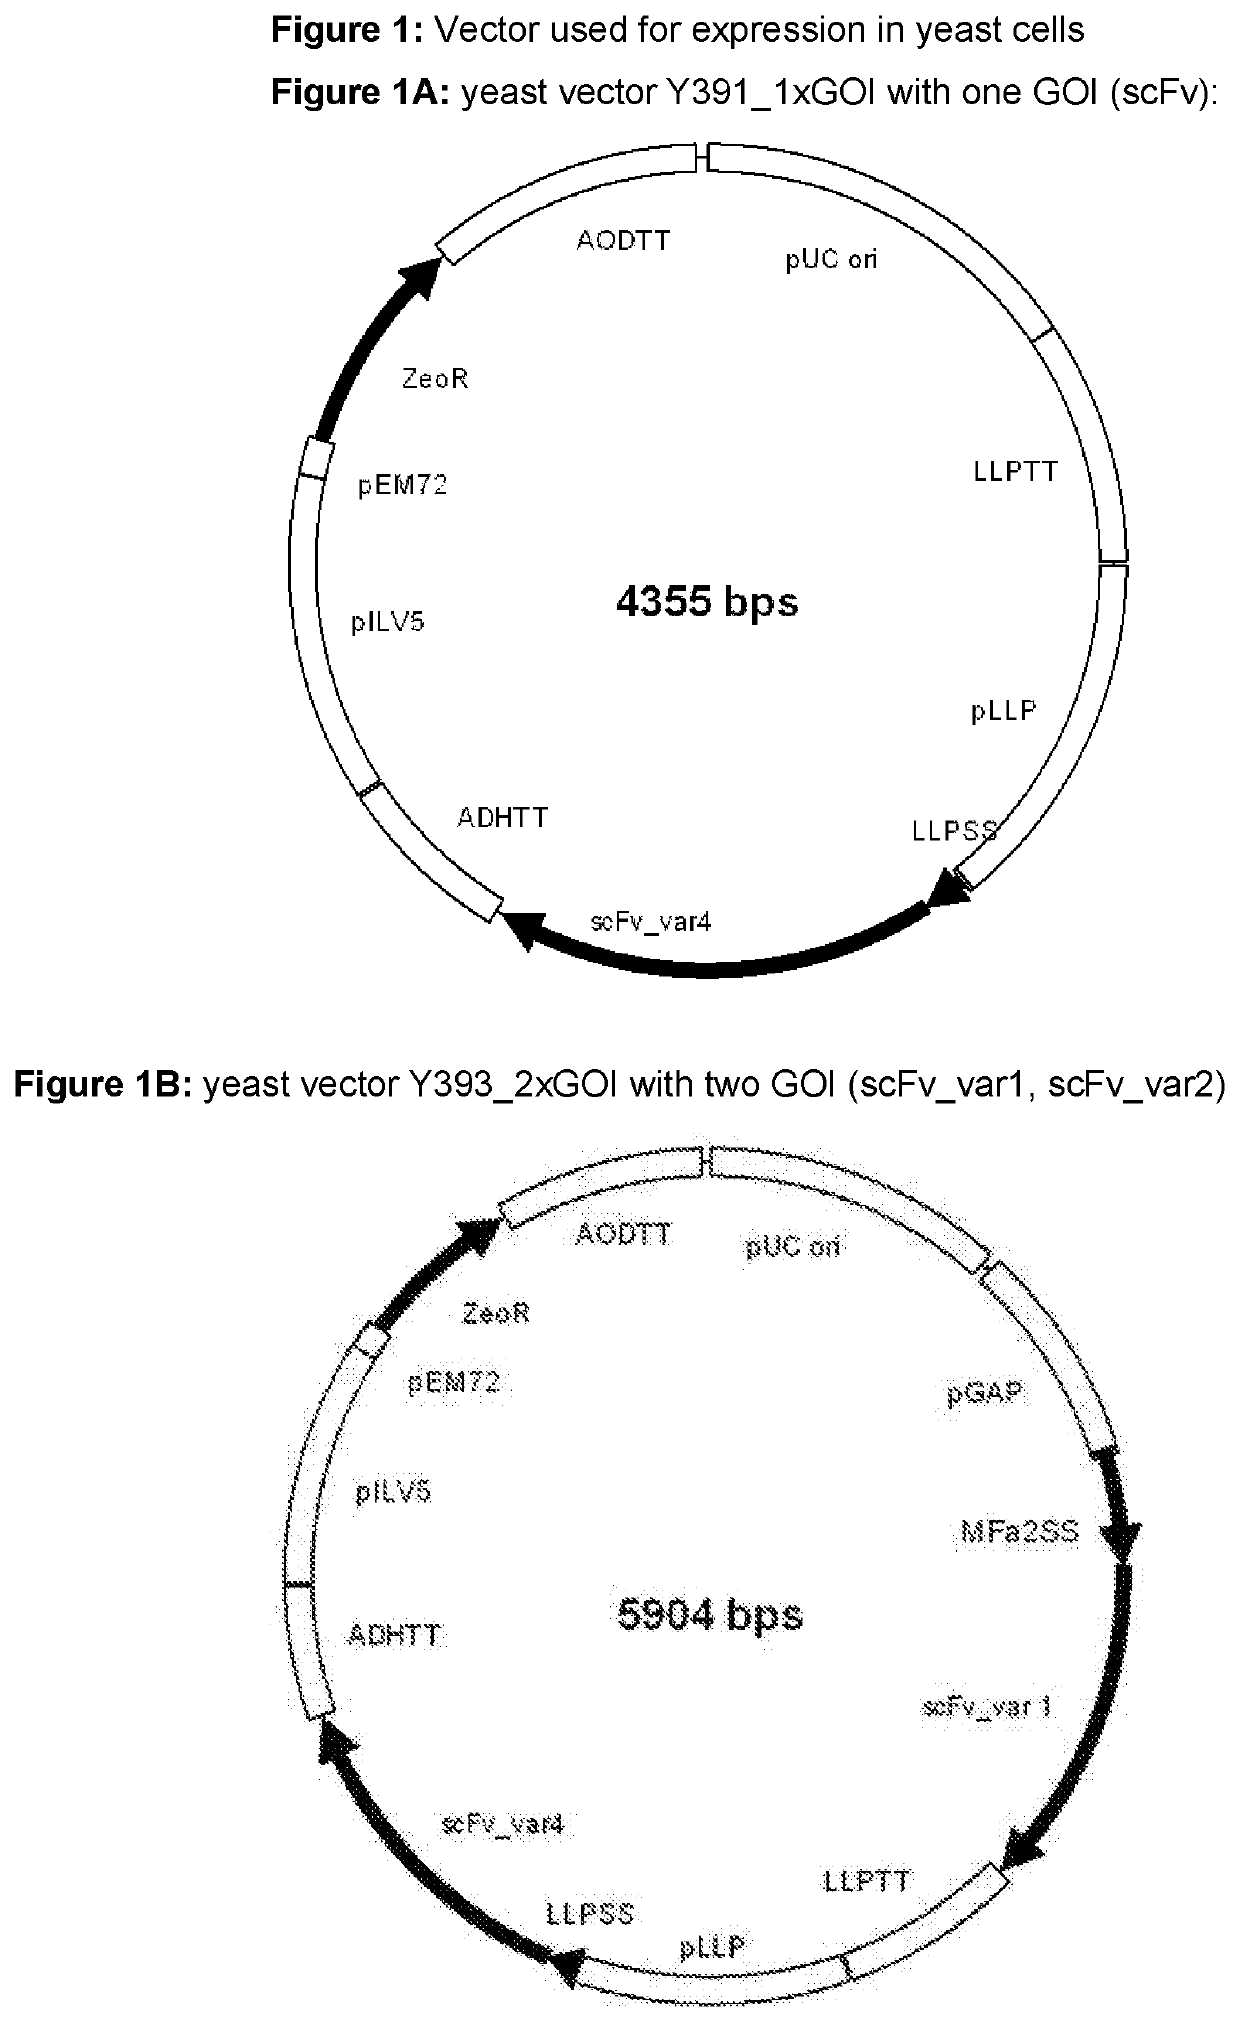 Multi-Copy Gene Protein Expression System